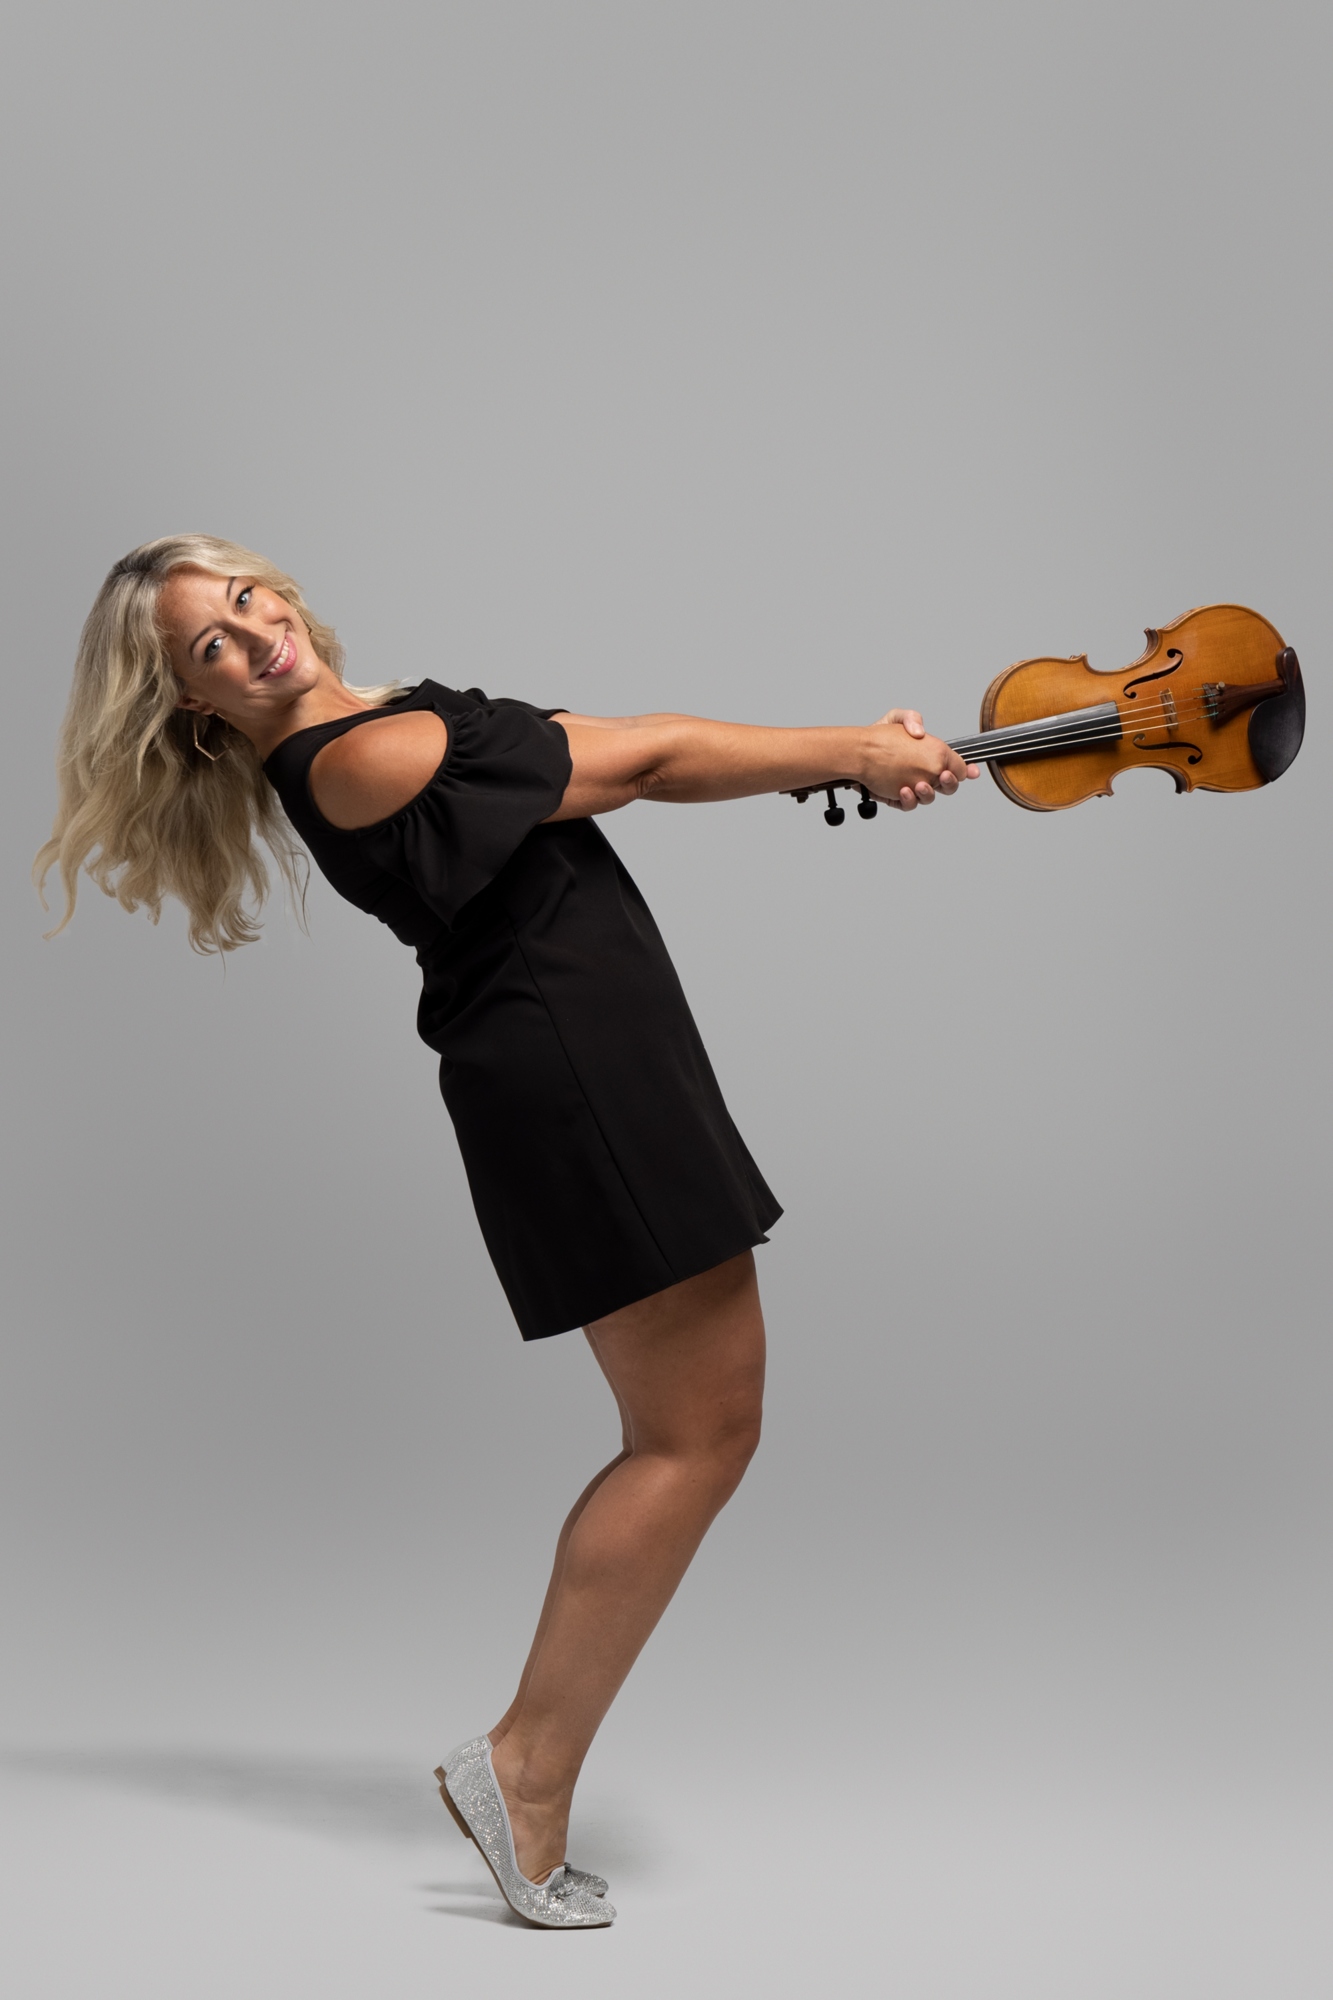 Violinist Amanda Nix is ready to take on the Beatles. (Courtesy photo: Matthew Holler)